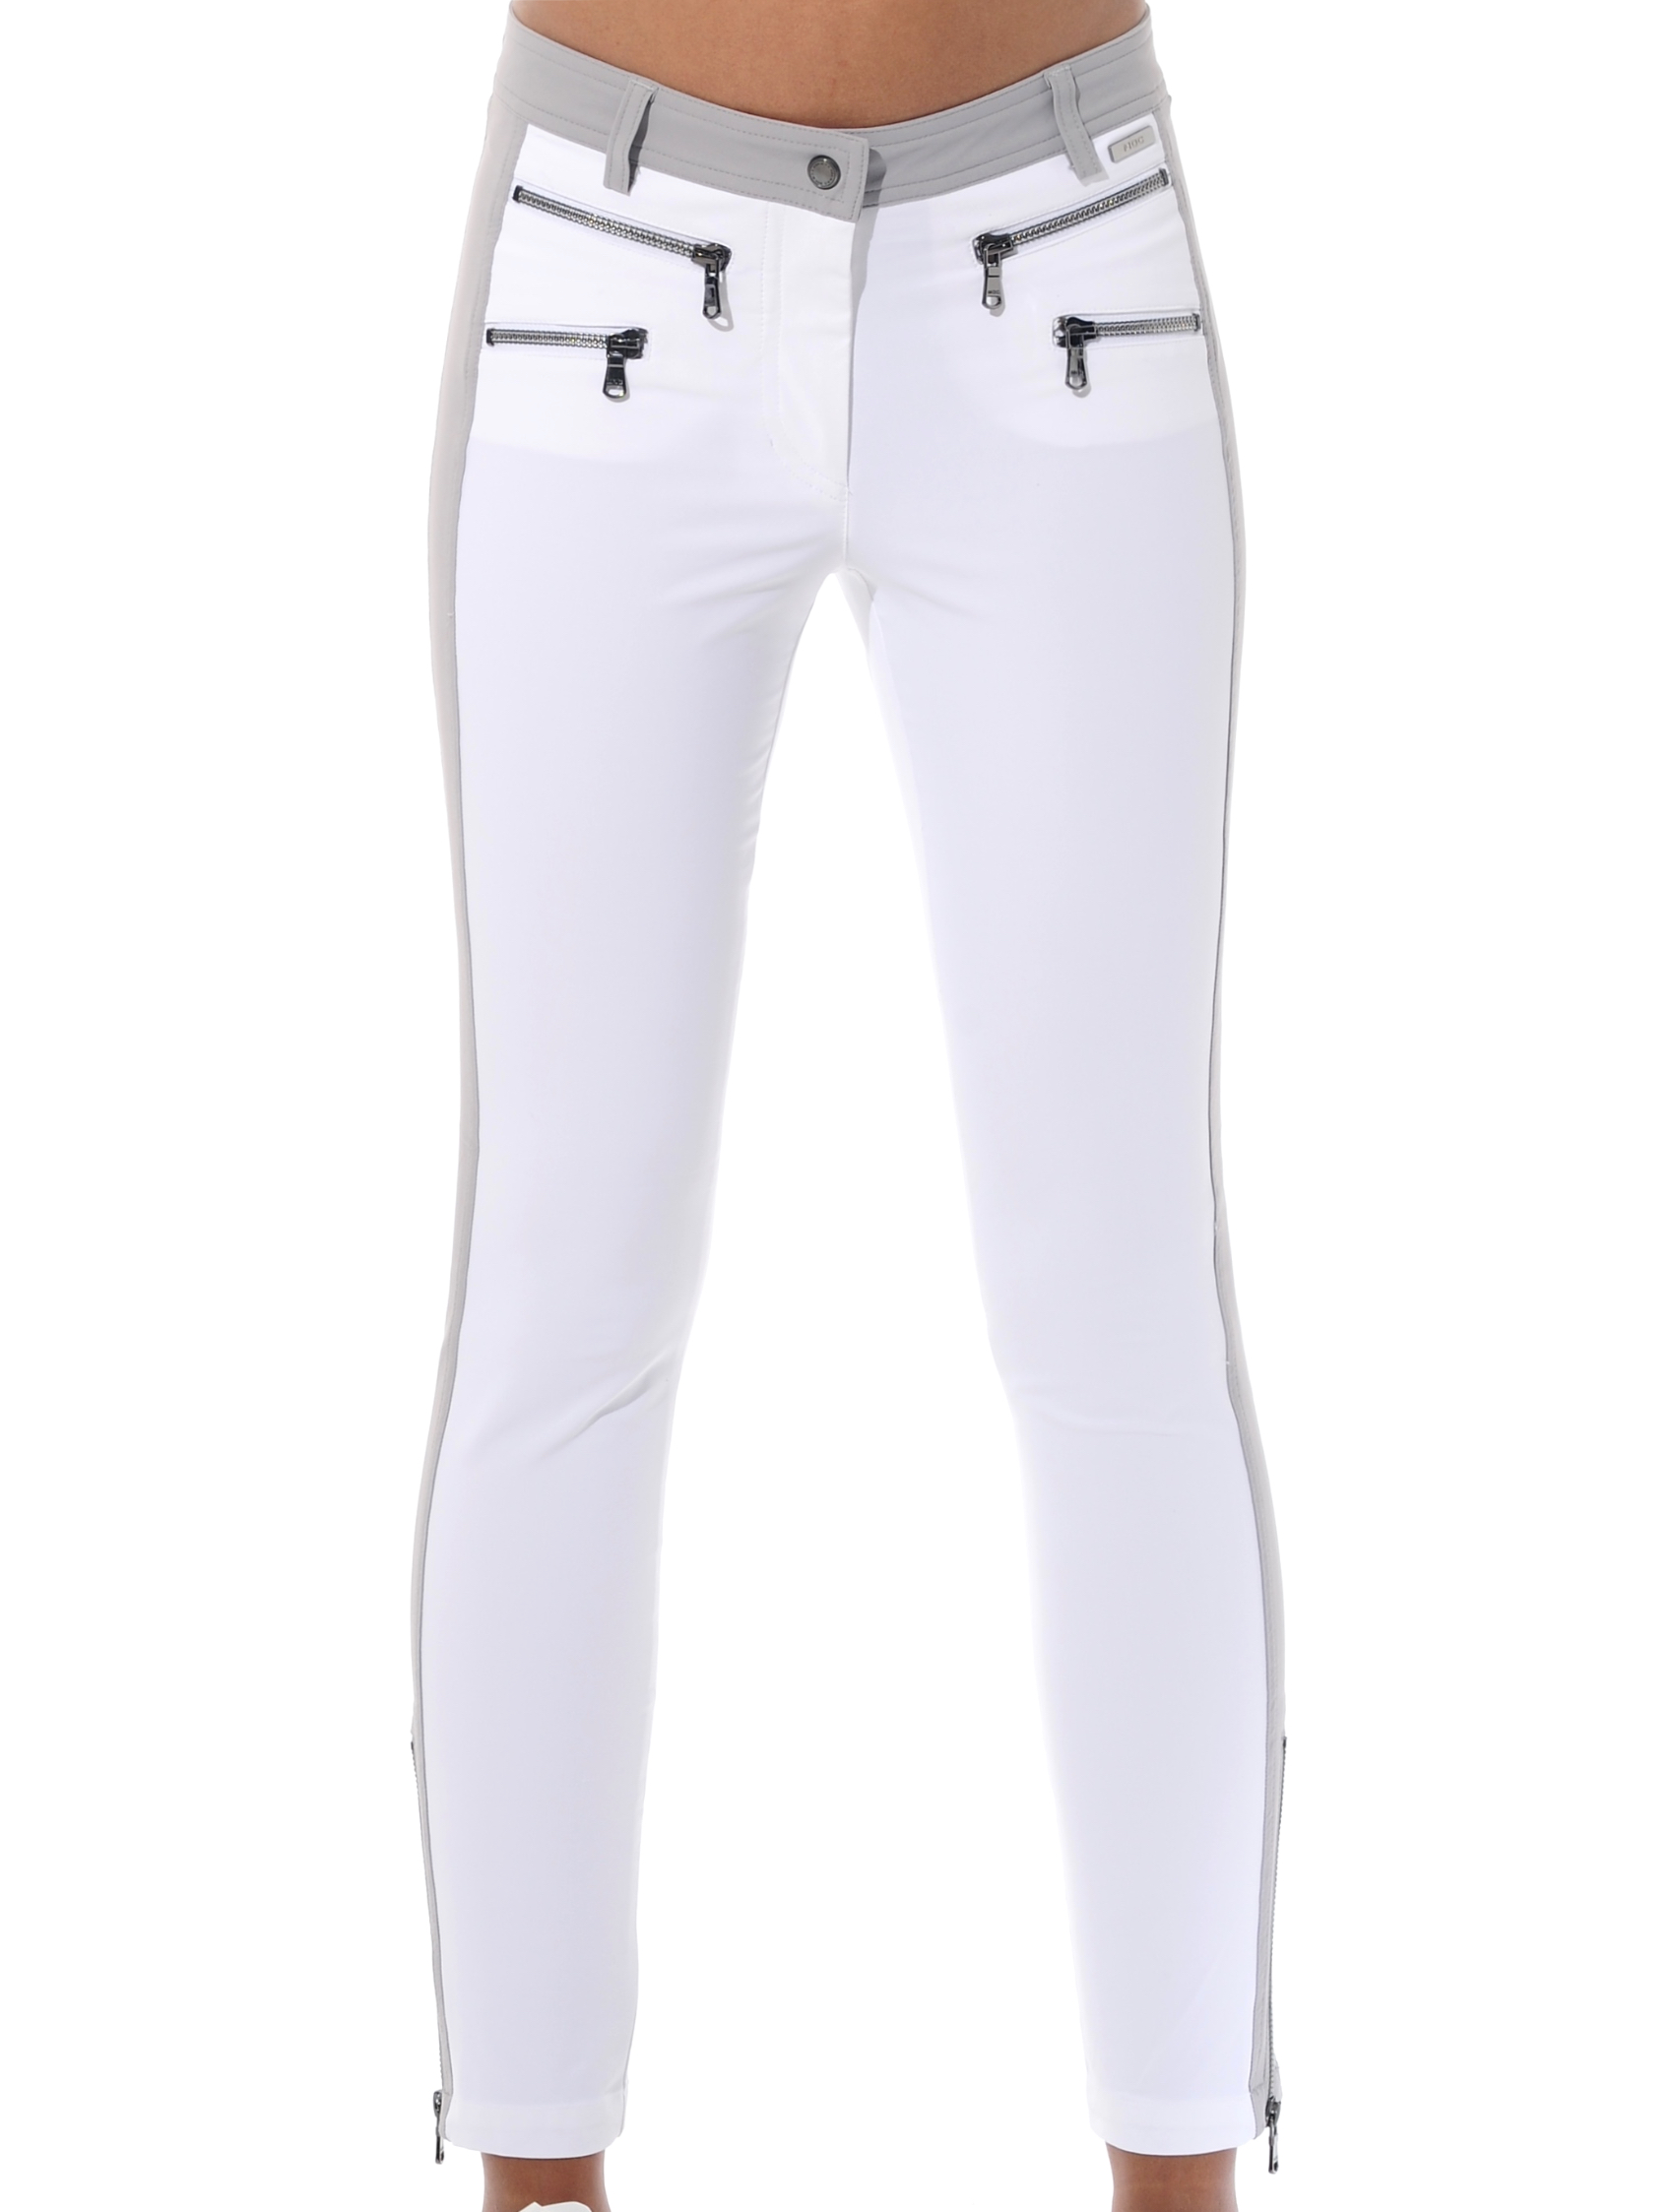 4way stretch double zip ankle pants white/grey 